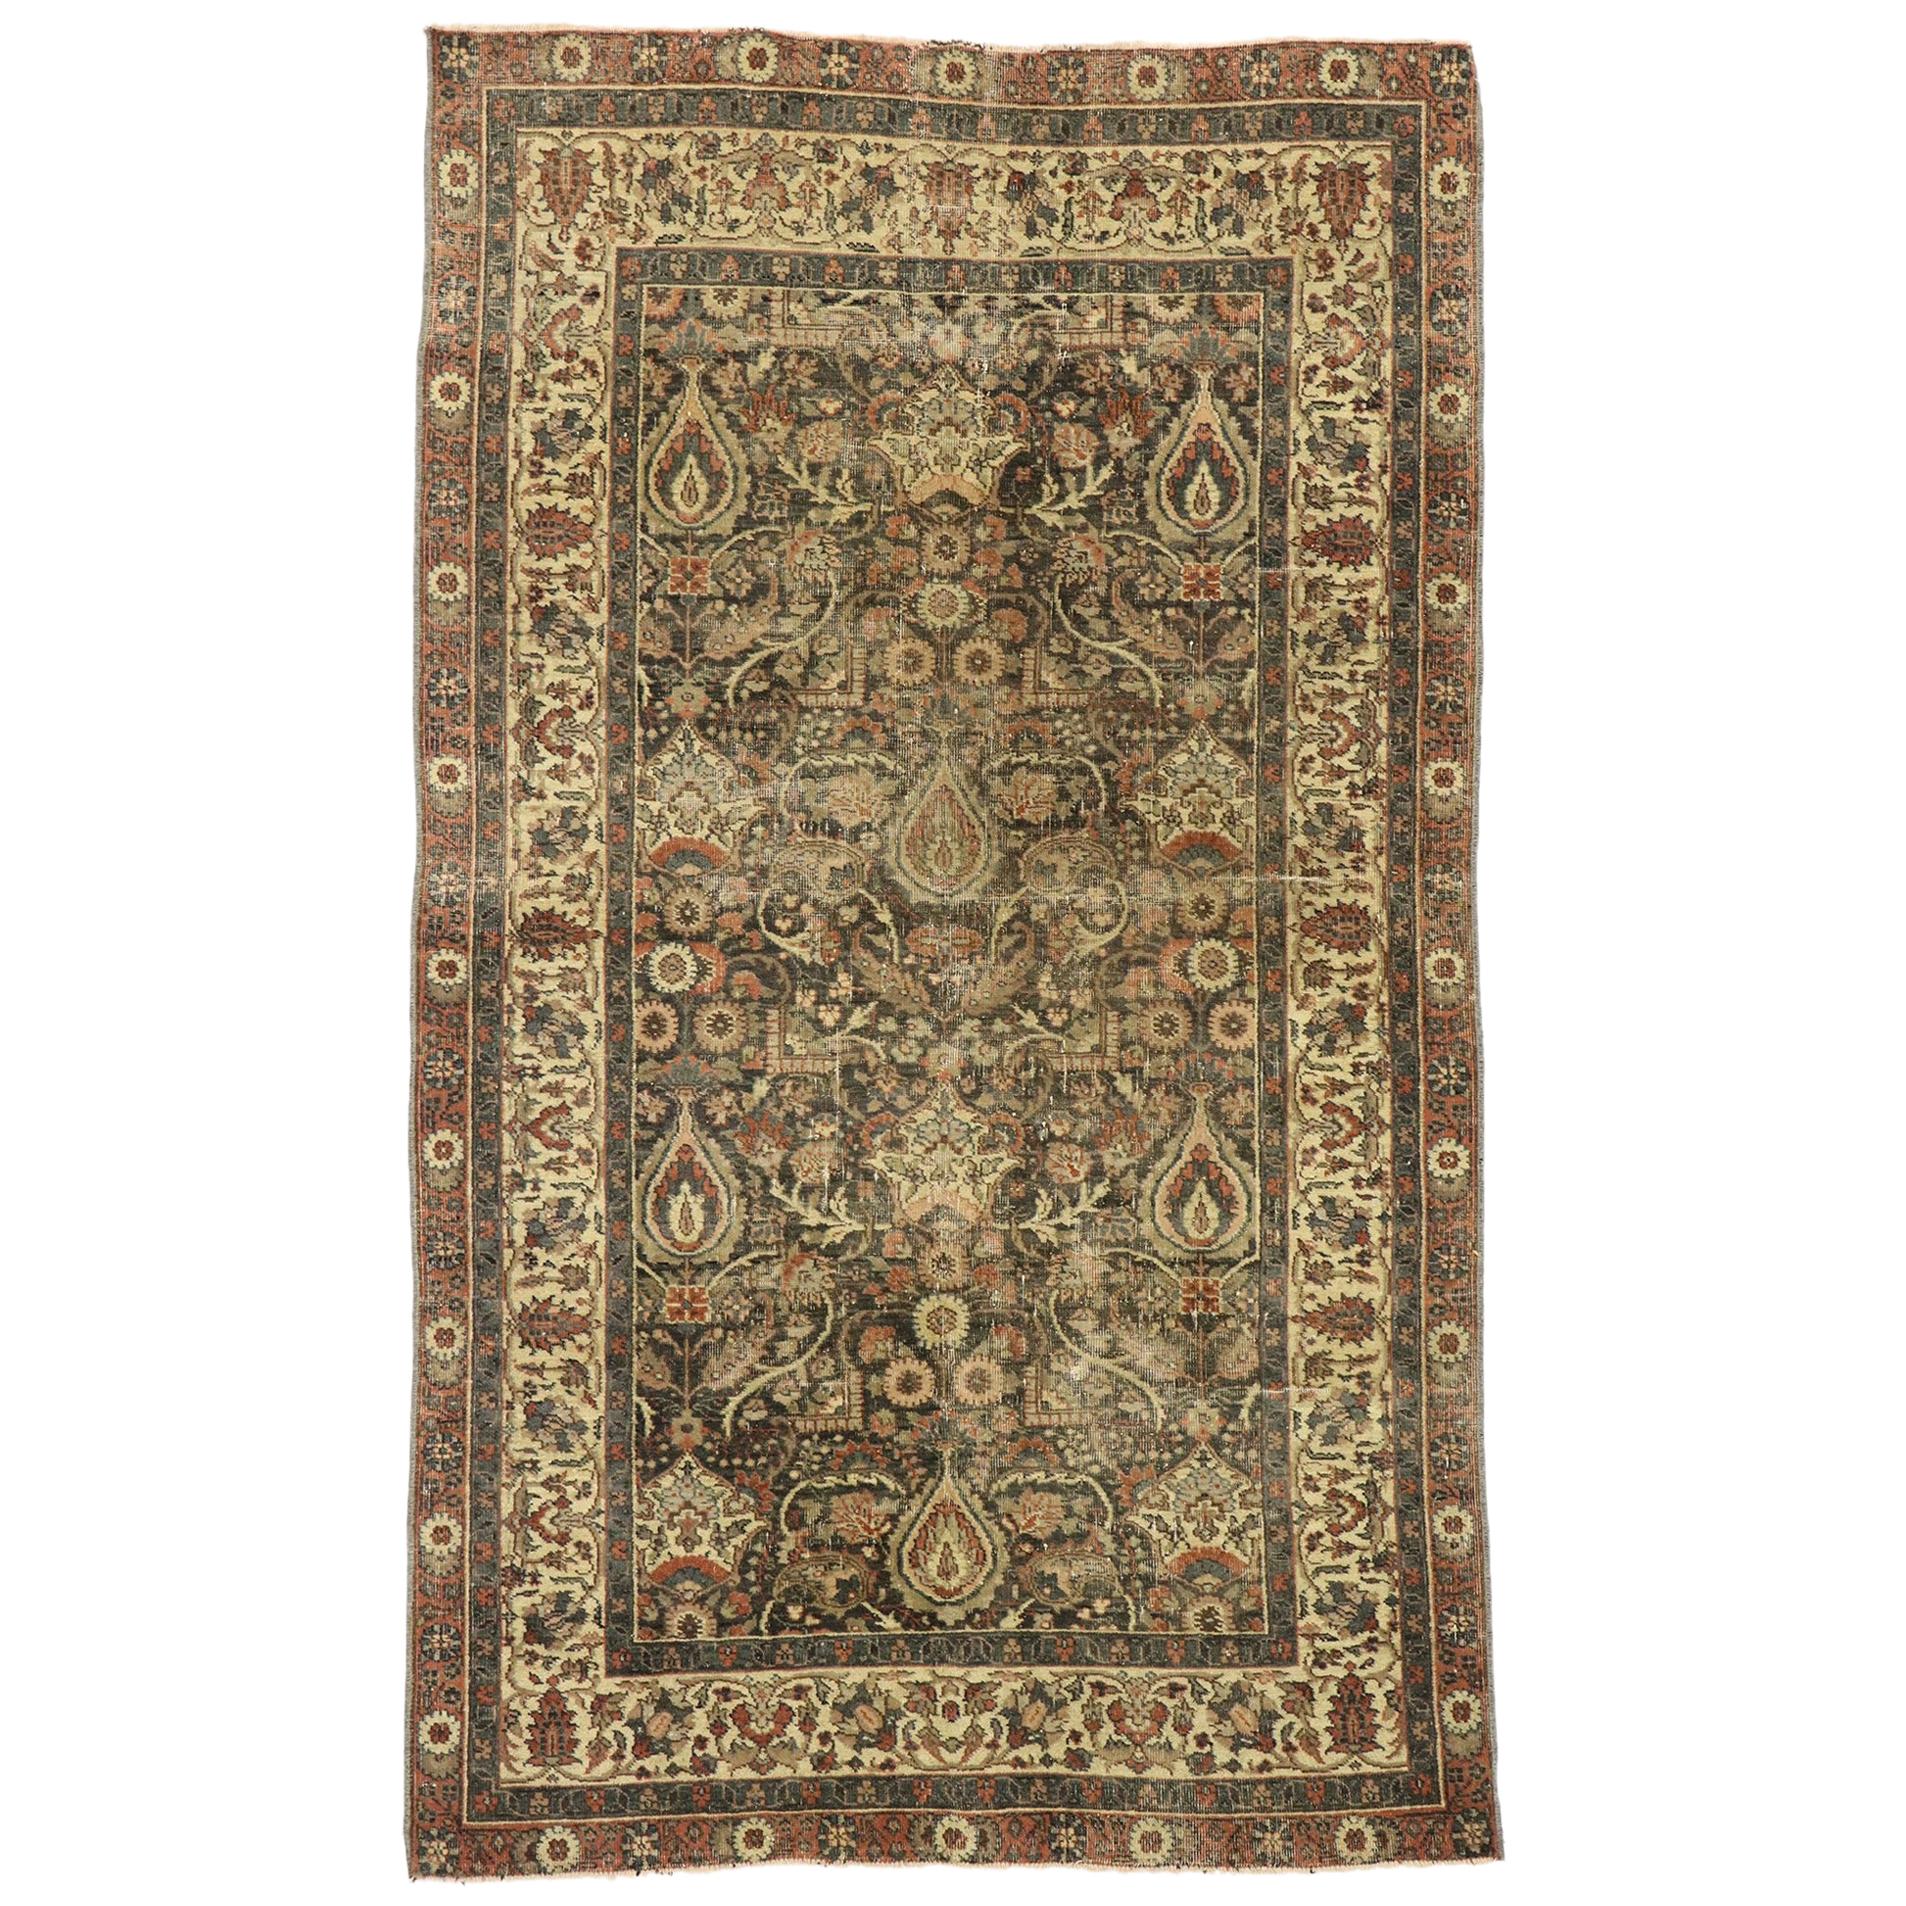 Distressed Antique Turkish Sivas Rug with Rustic Belgian Style